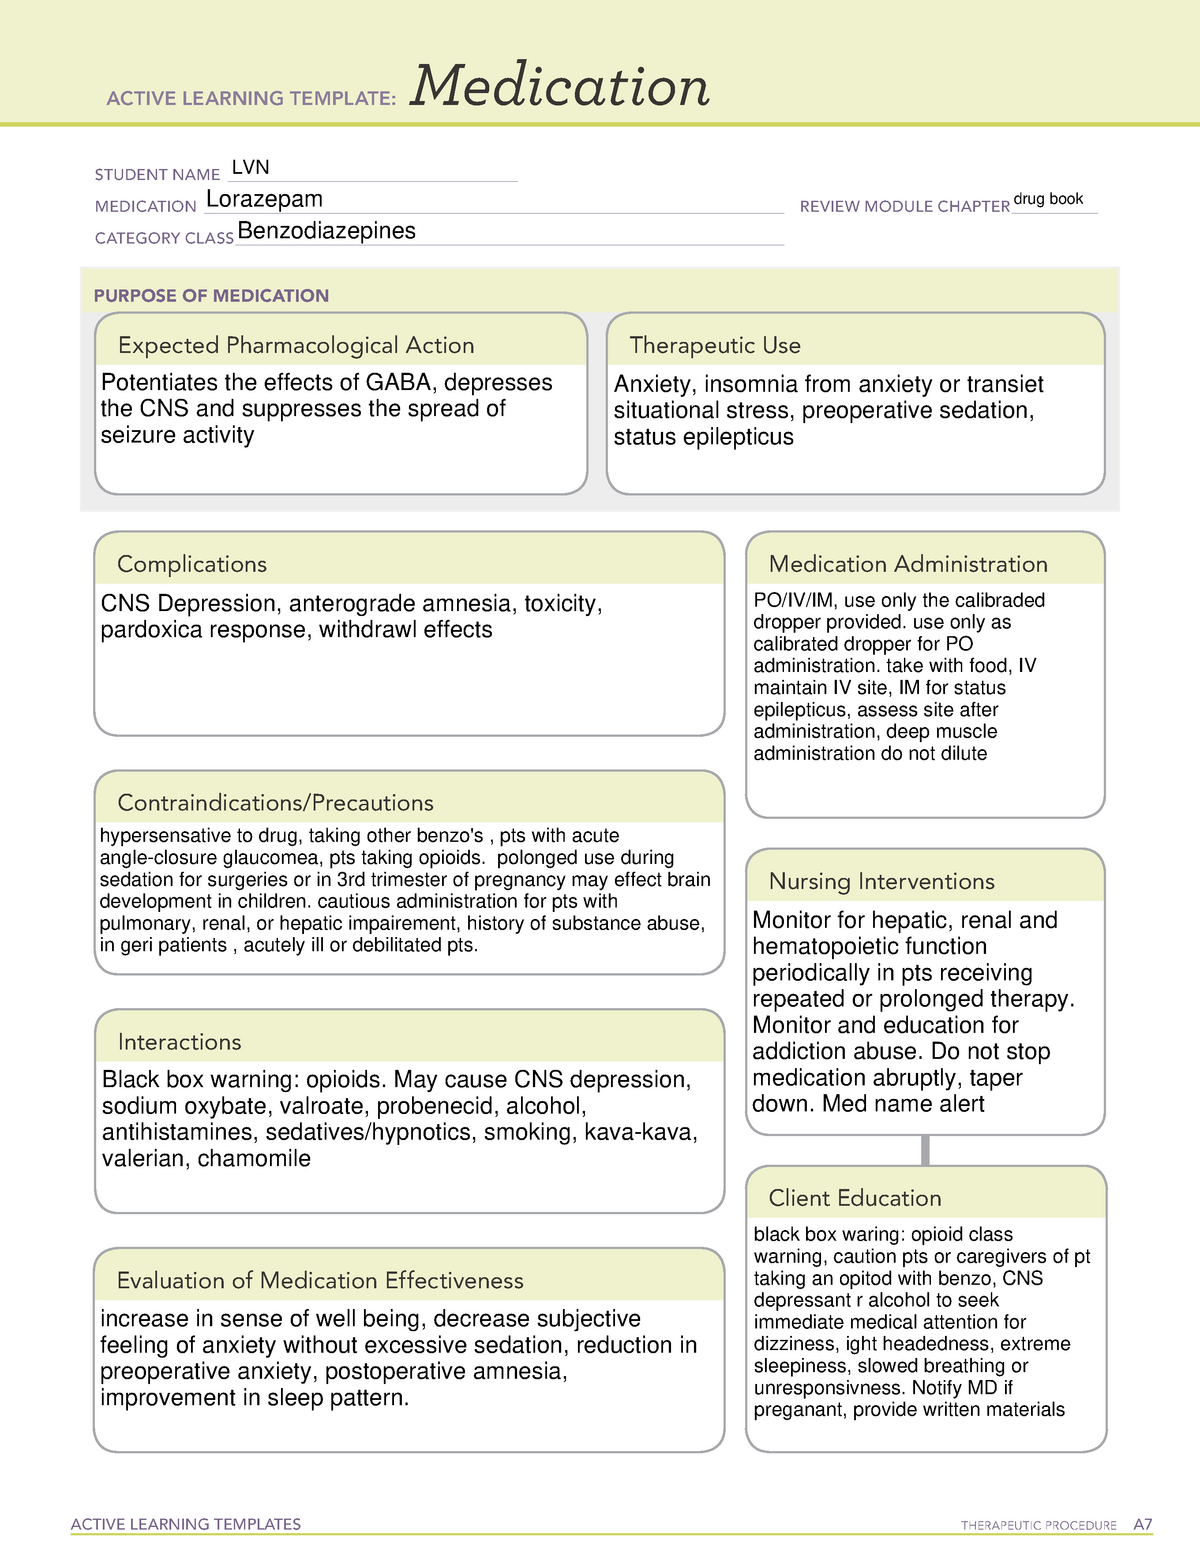 lorazepam-template-active-learning-templates-therapeutic-procedure-a